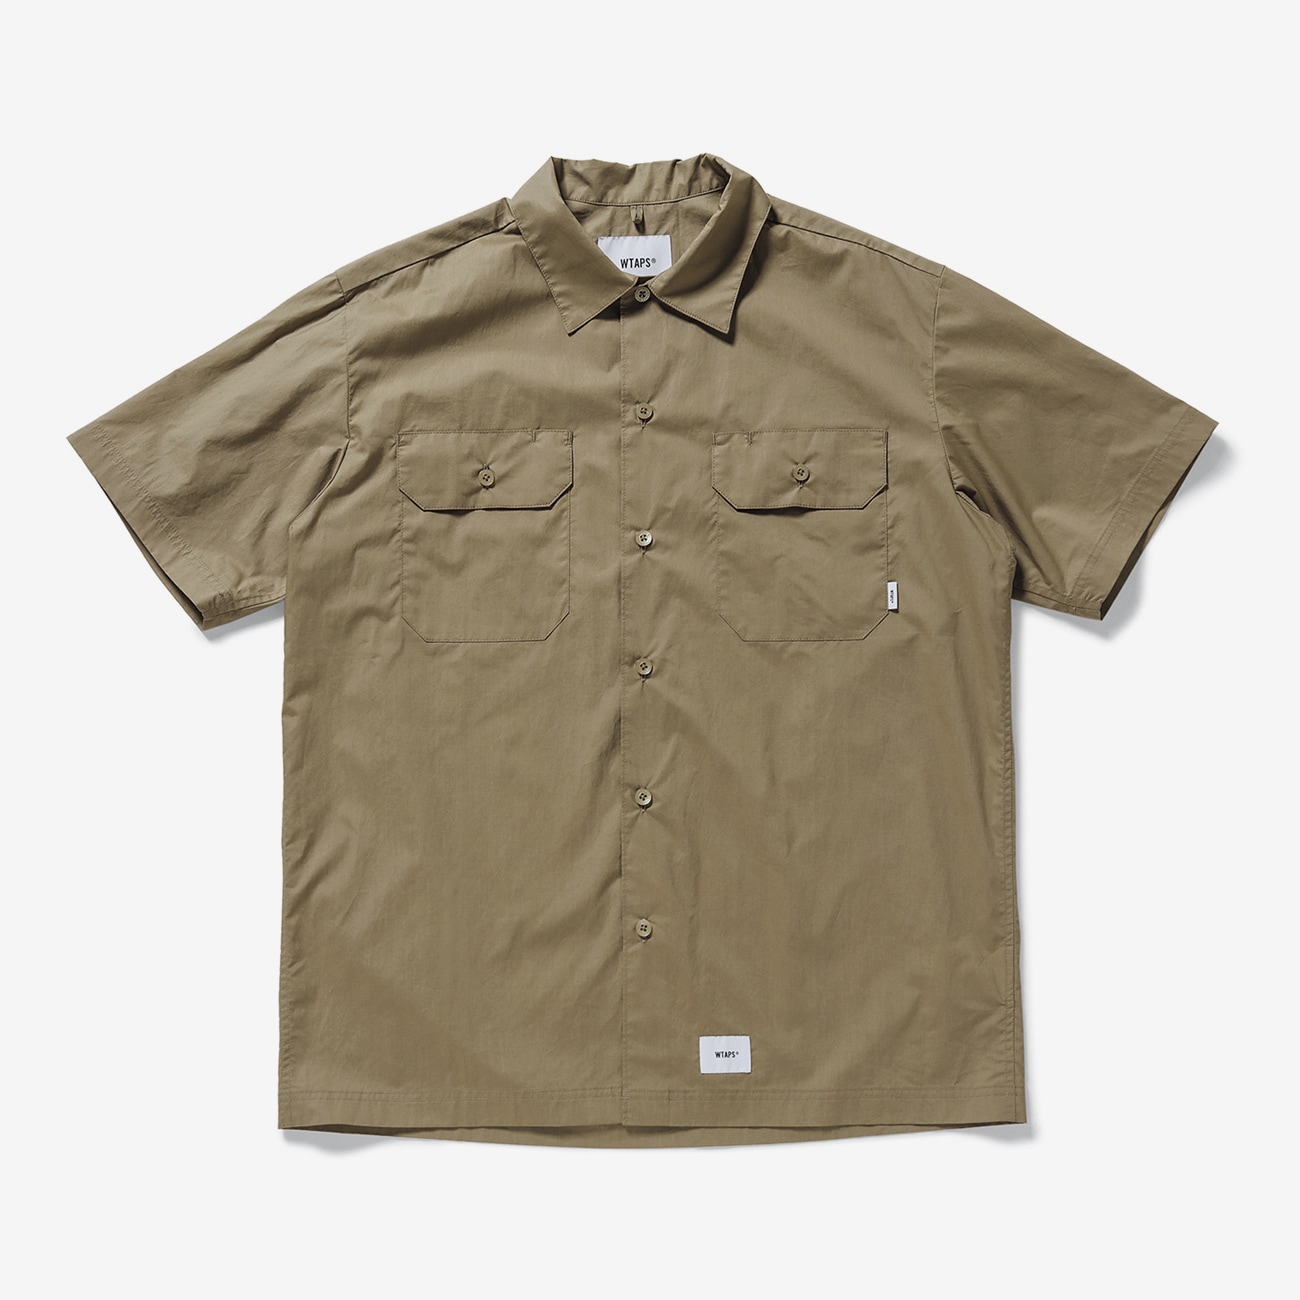 WTAPS DECK / SS / COTTON. BROADCLOTH.